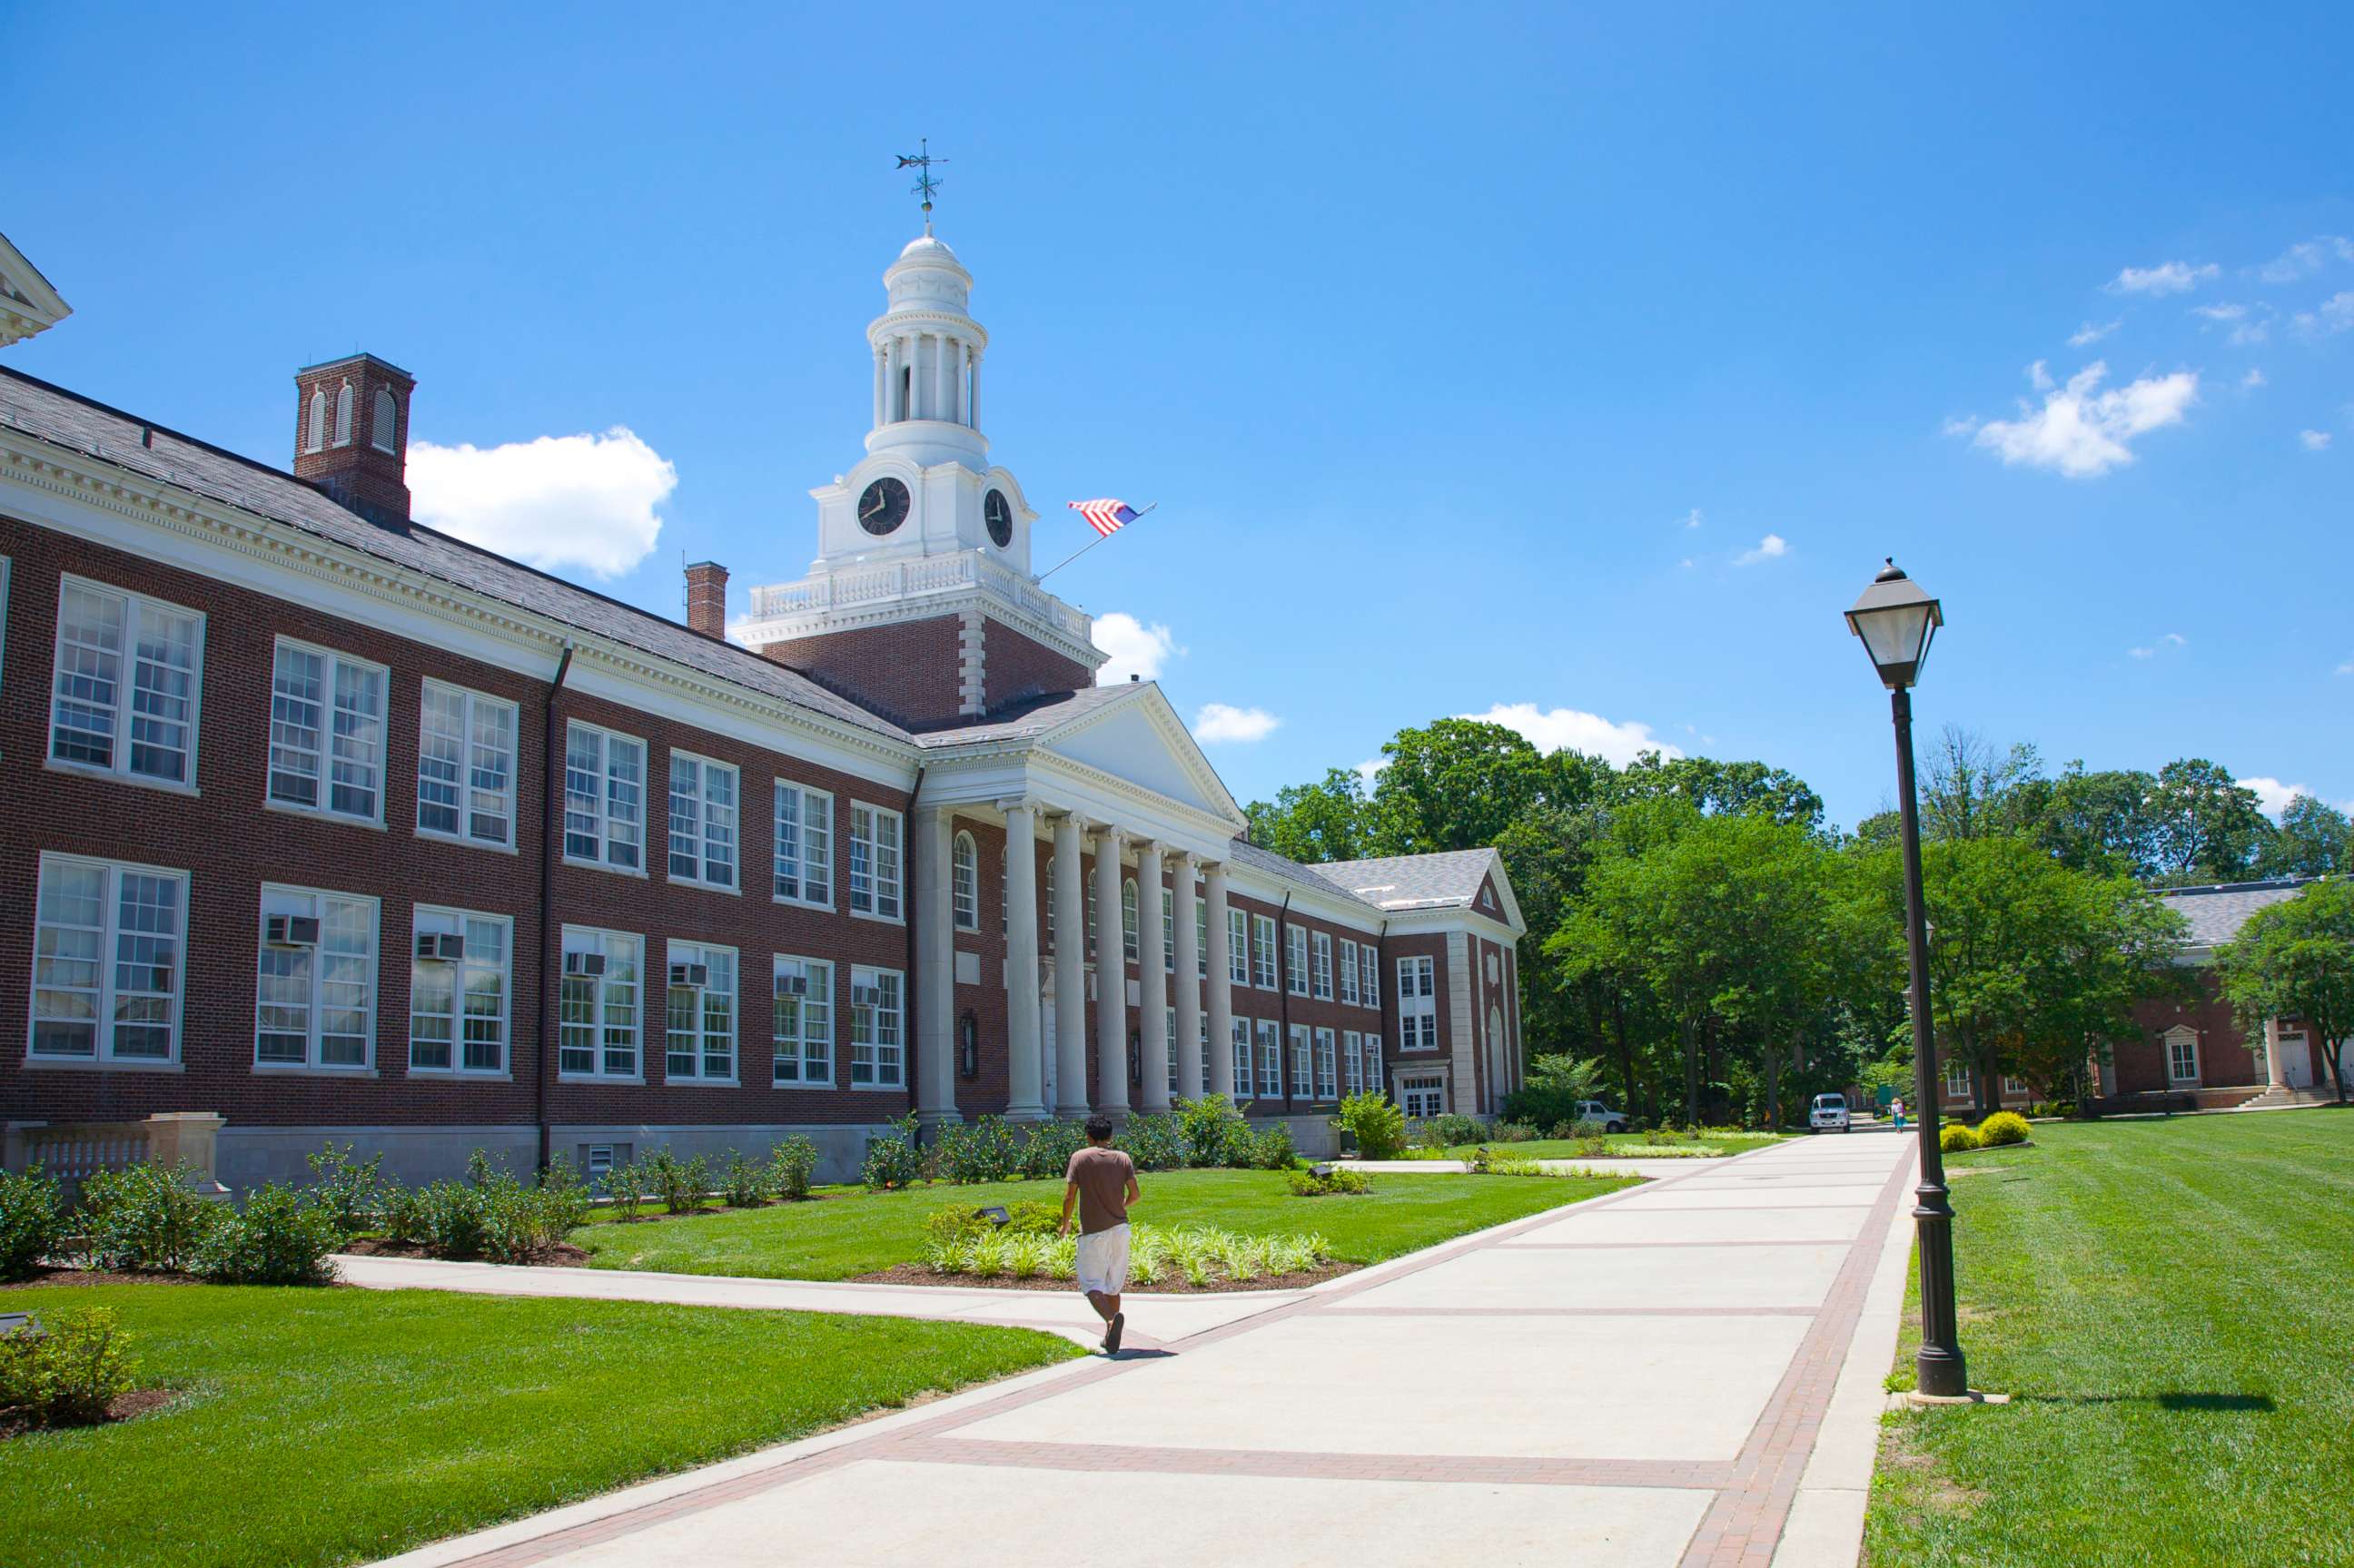 PHOTO: The campus of The College of New Jersey is seen in this stock photo.